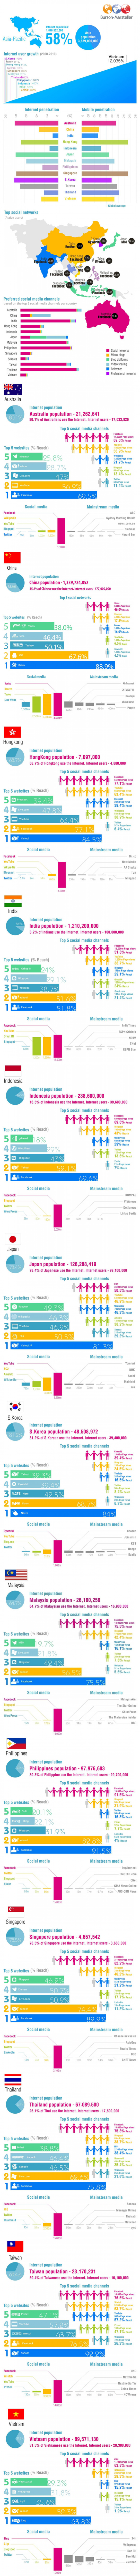 Asia Pacific social media Infographic